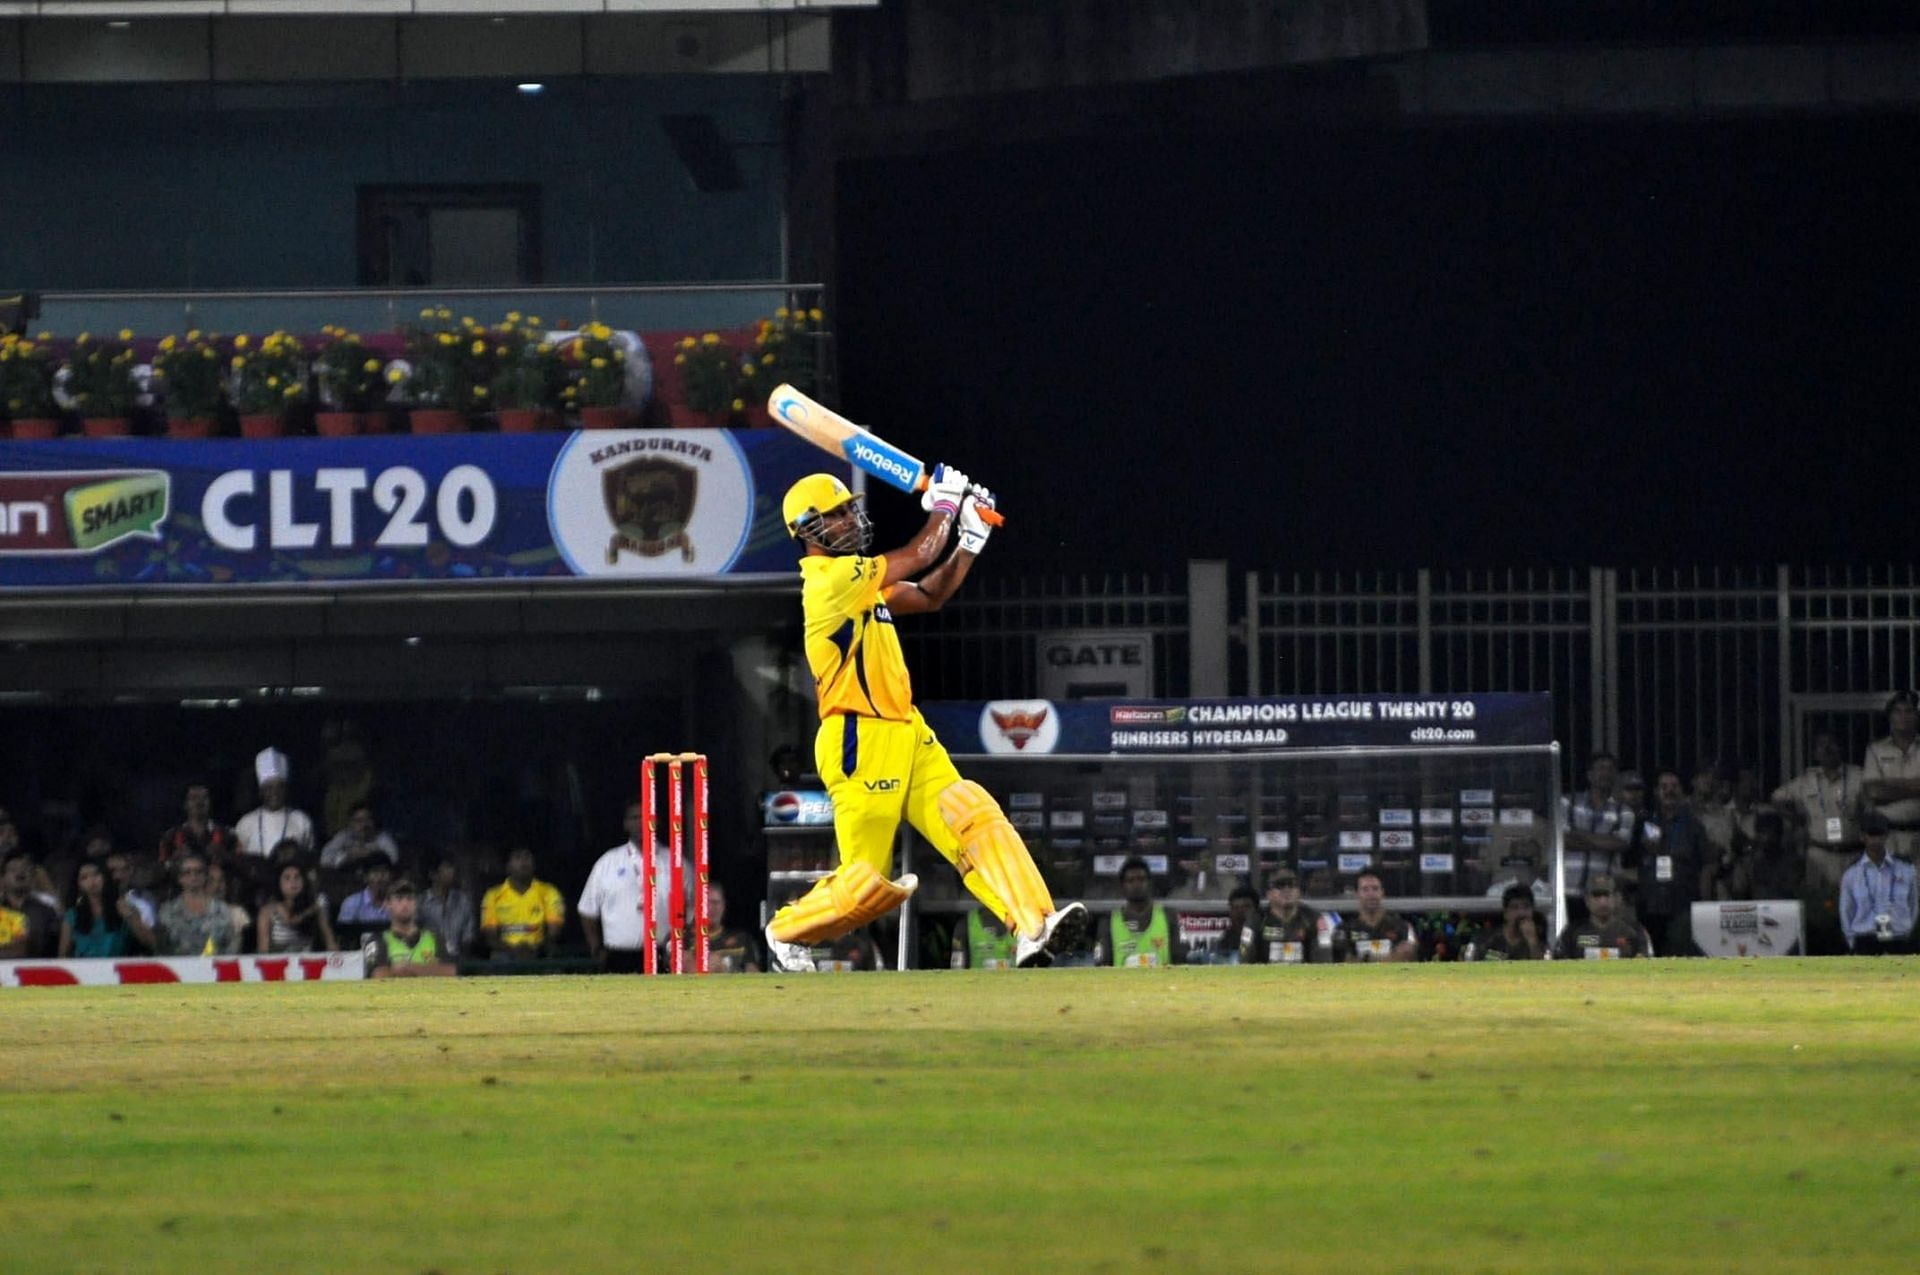 Dhoni played a special innings against SRH in the 2013 CLT20